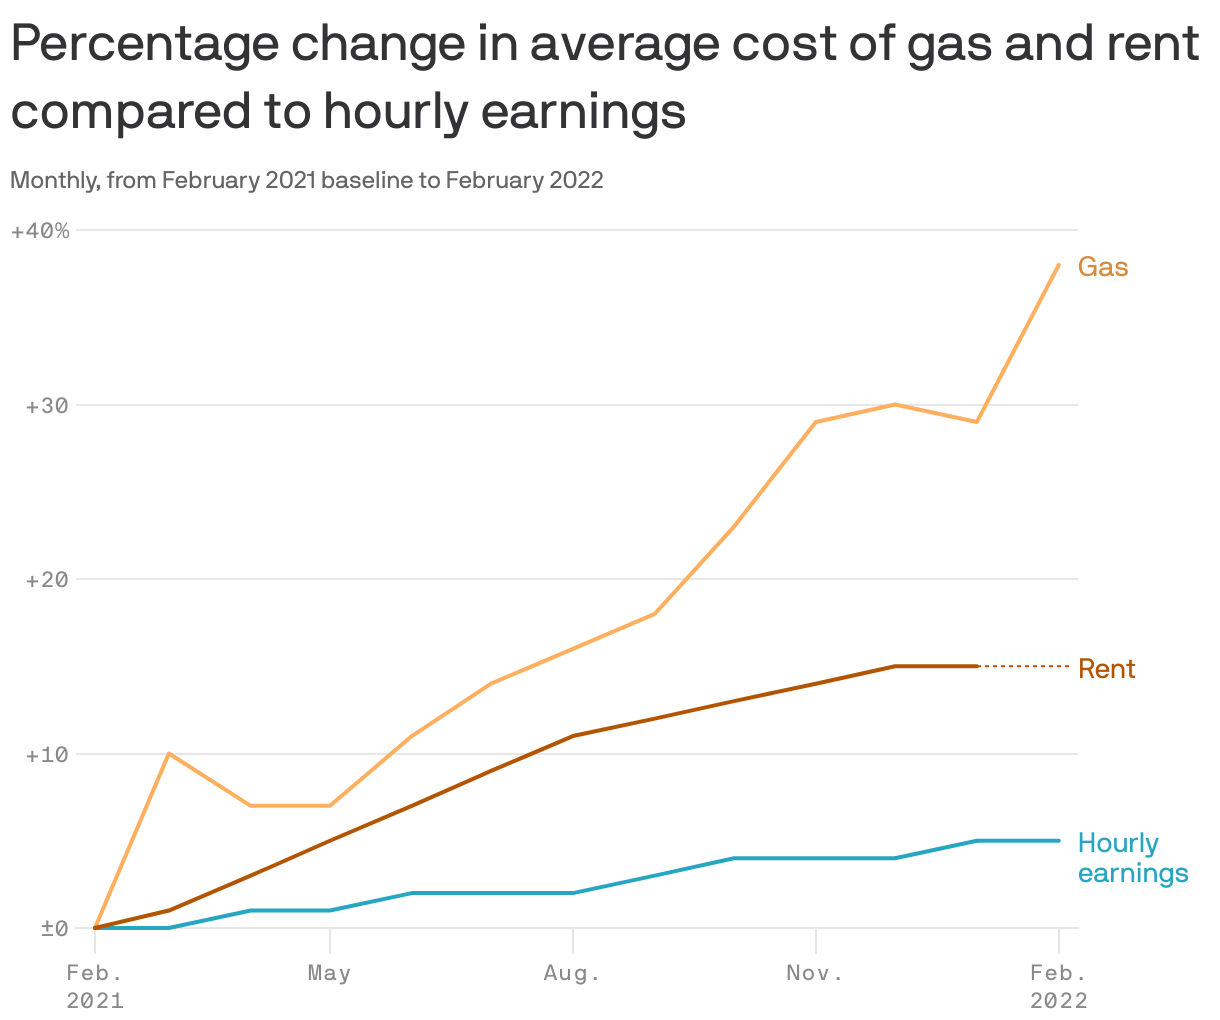 Percentage change in average cost of gas and rent compared to hourly earnings